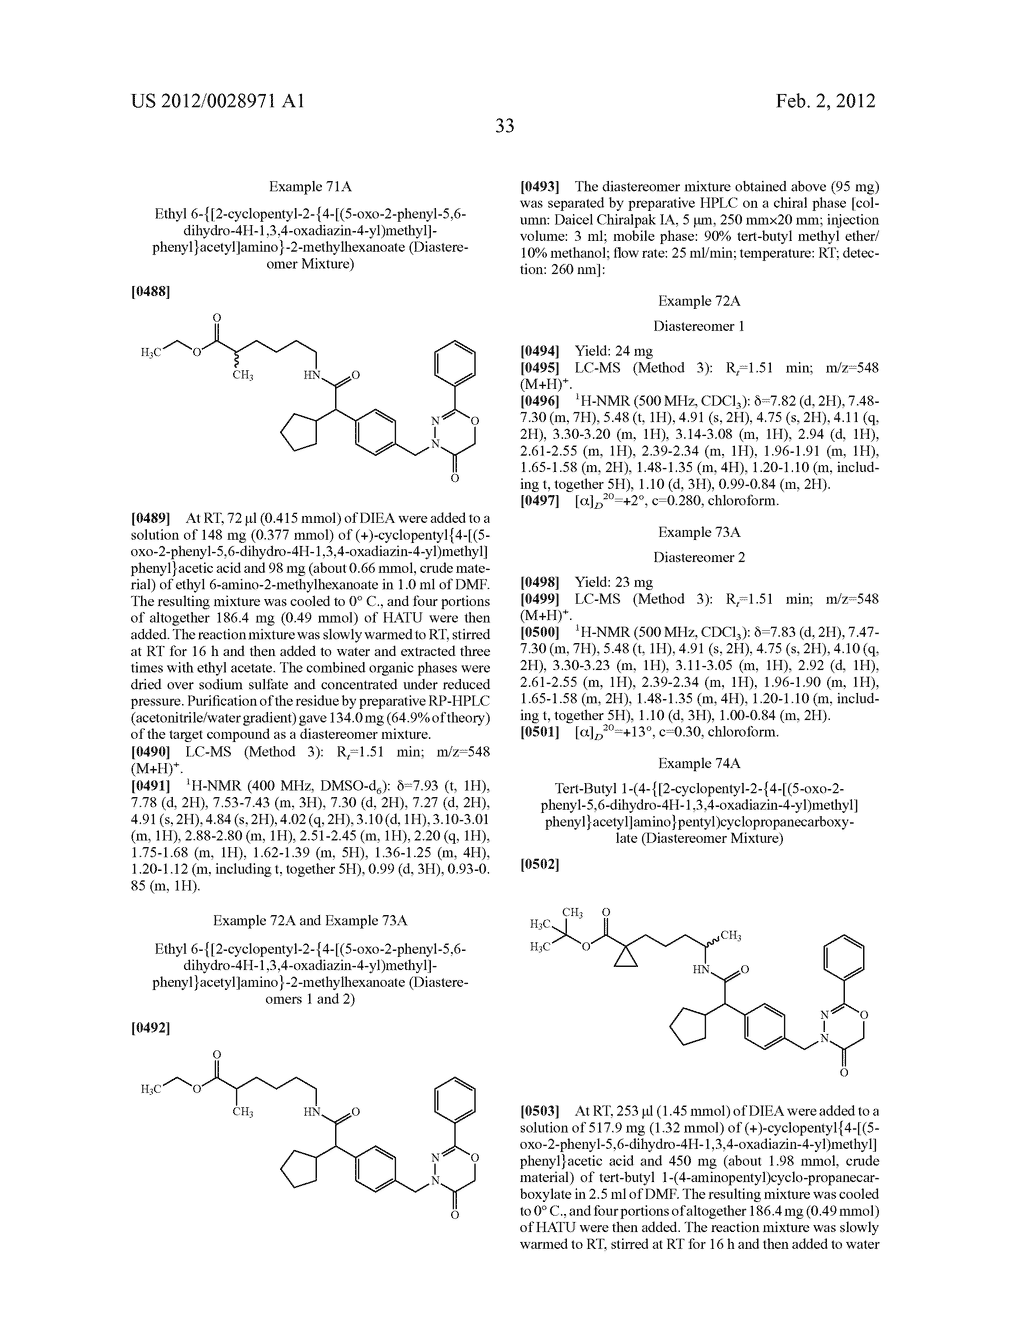 OXO-HETEROCYCLICALLY SUBSTITUTED ALKYL CARBOXYLIC ACIDS AND USE THEREOF - diagram, schematic, and image 34